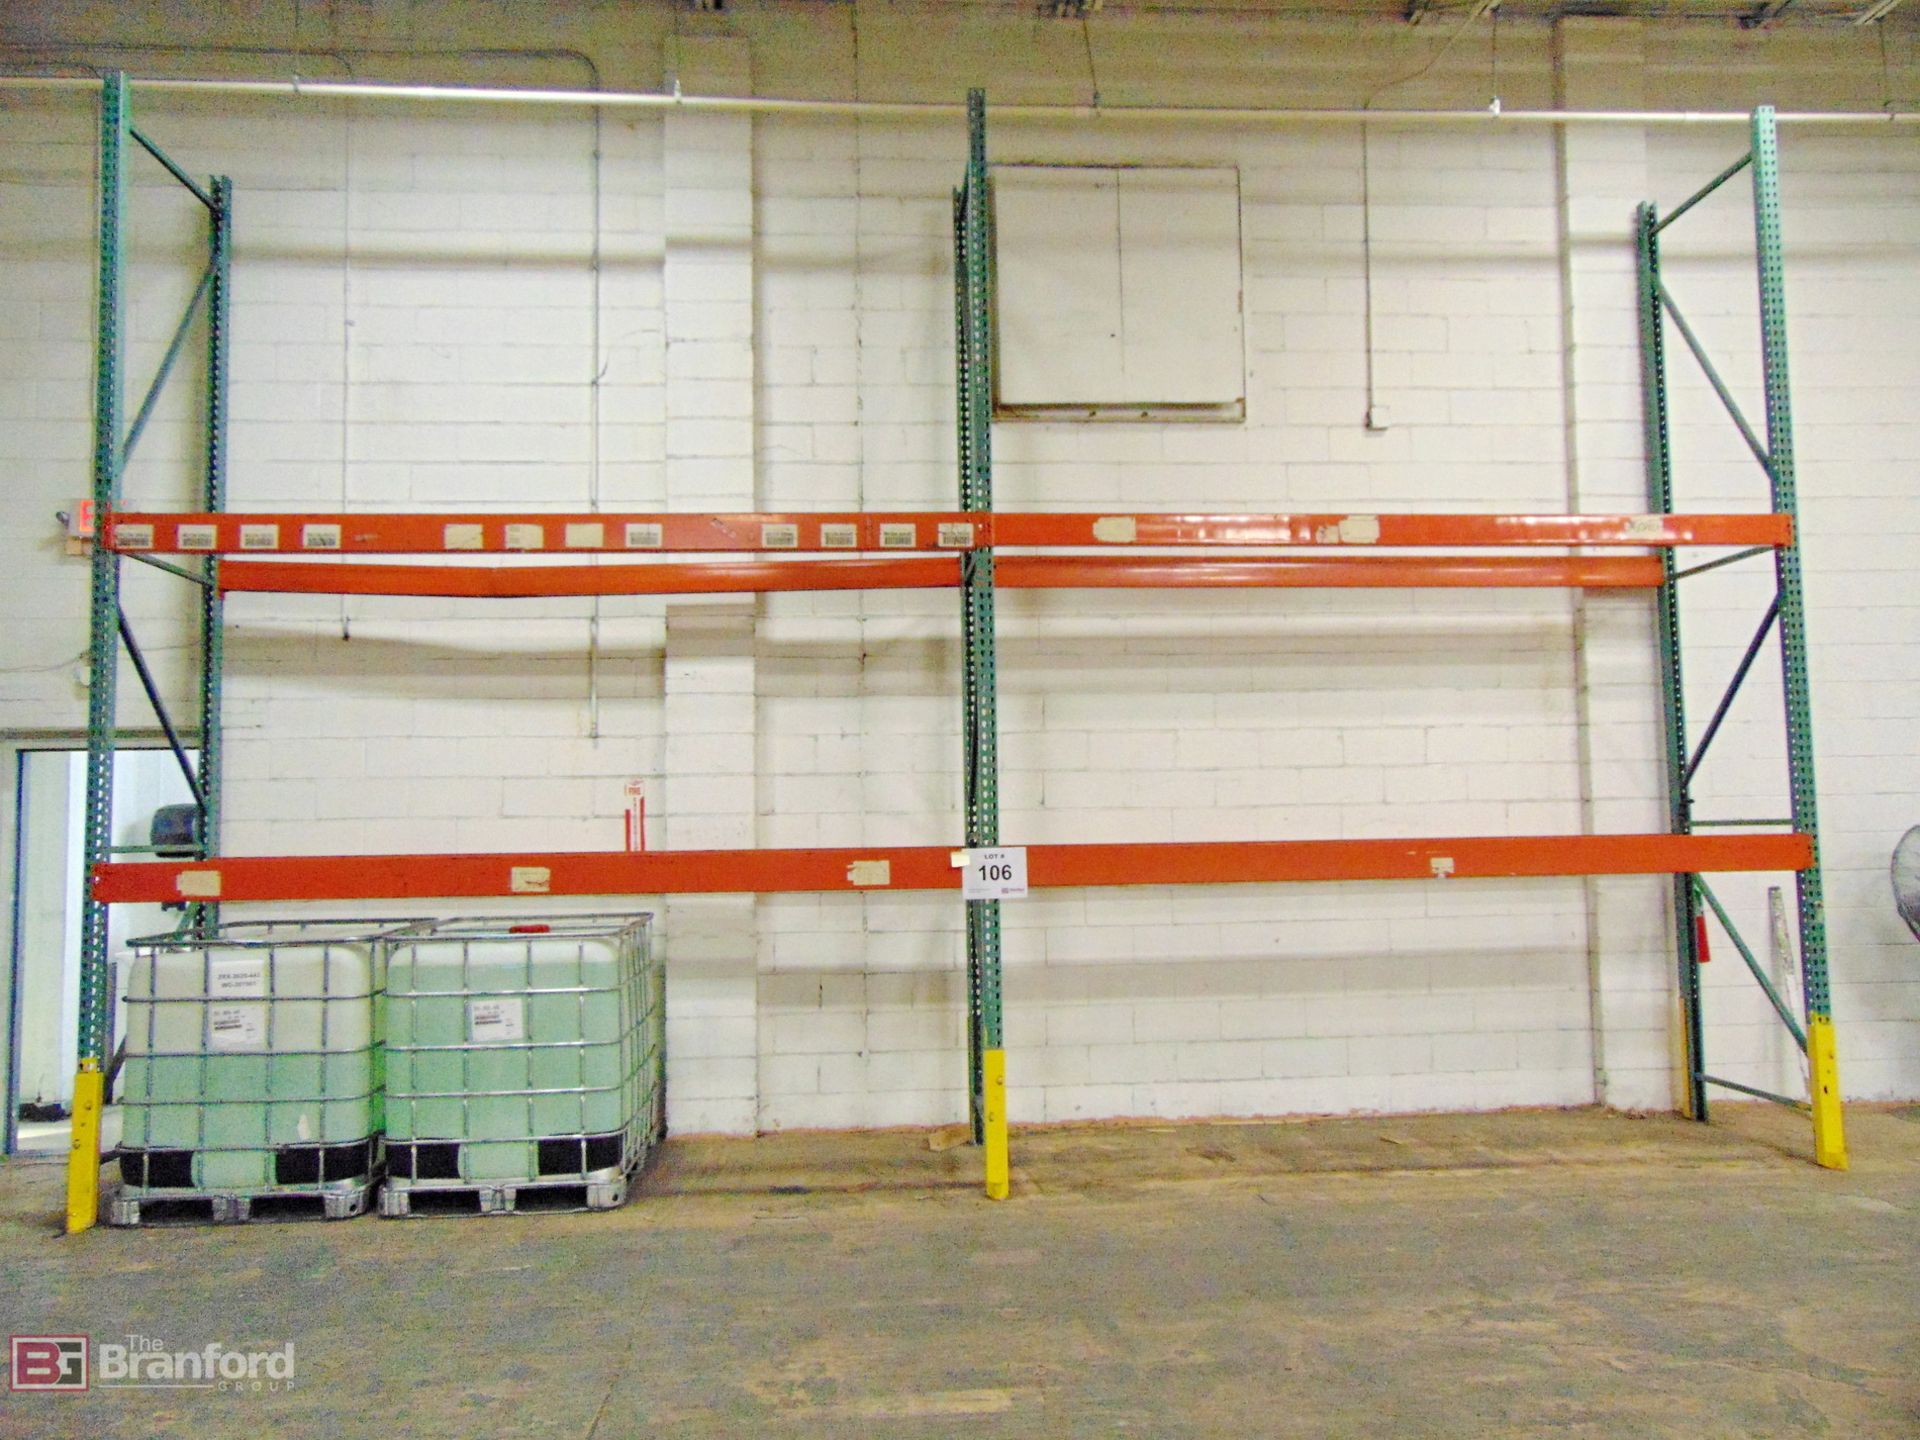 (8) Sections of teardrop style pallet racking